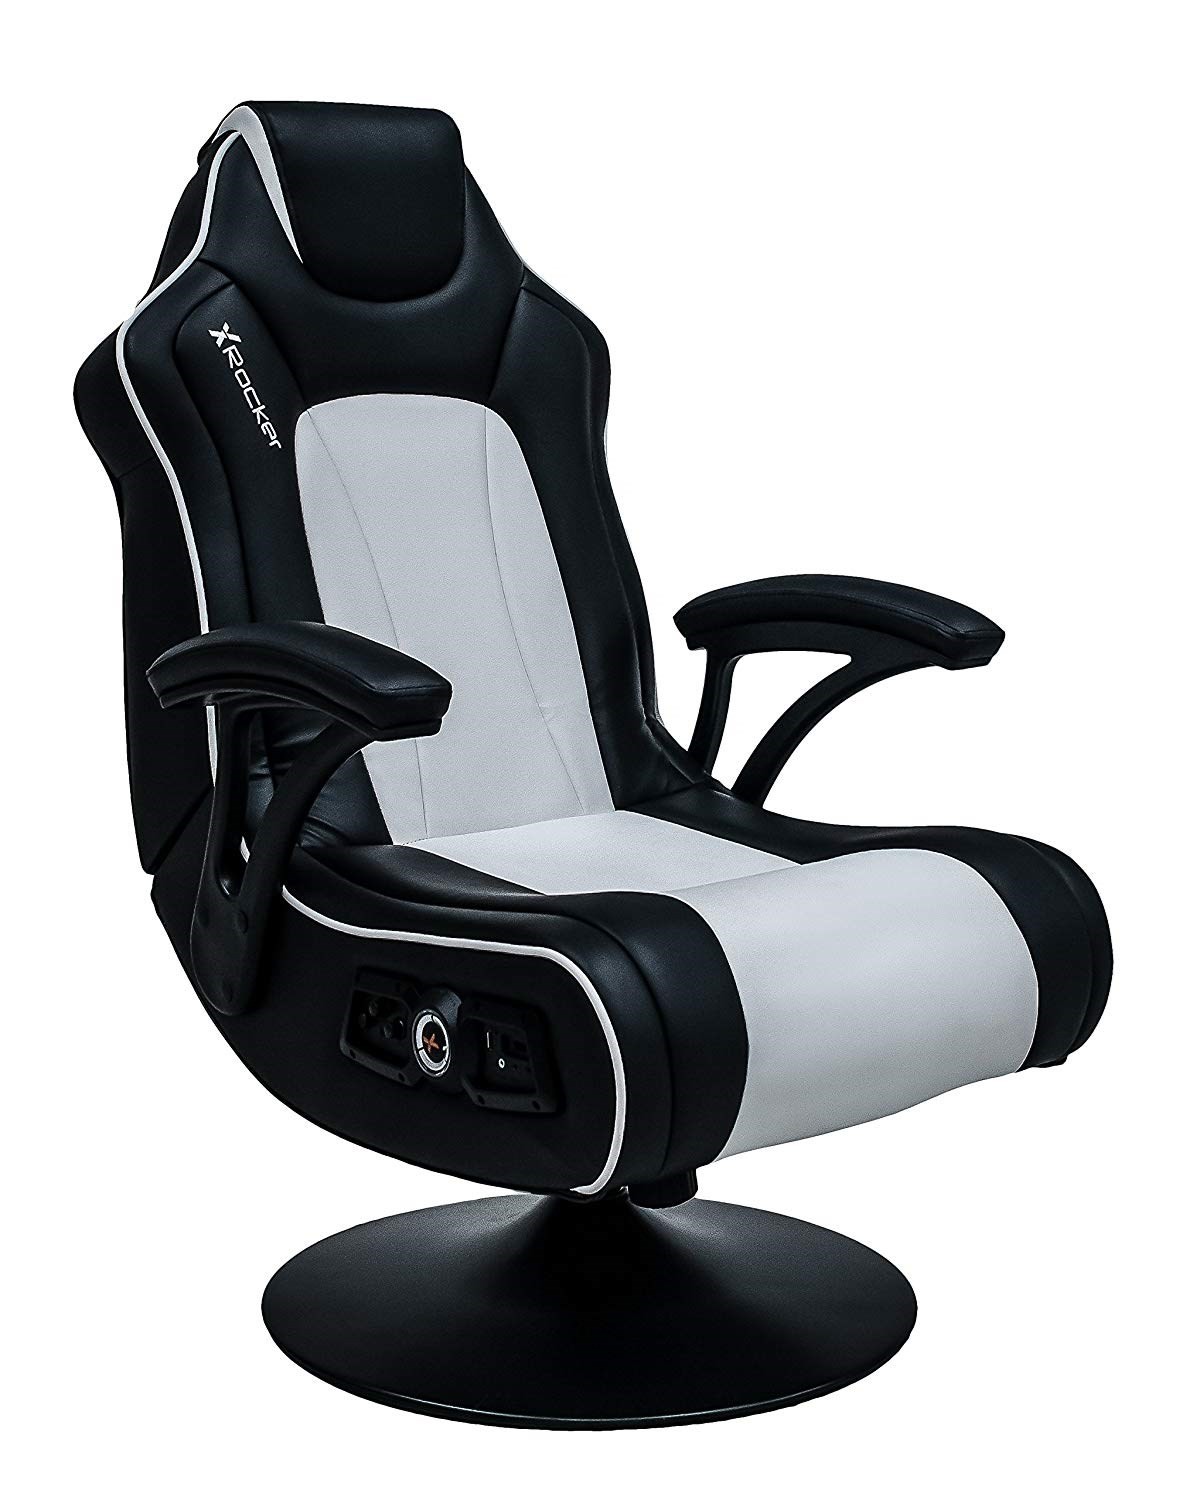 X rocker torque 2 1 gaming chair with bluetooth speakers